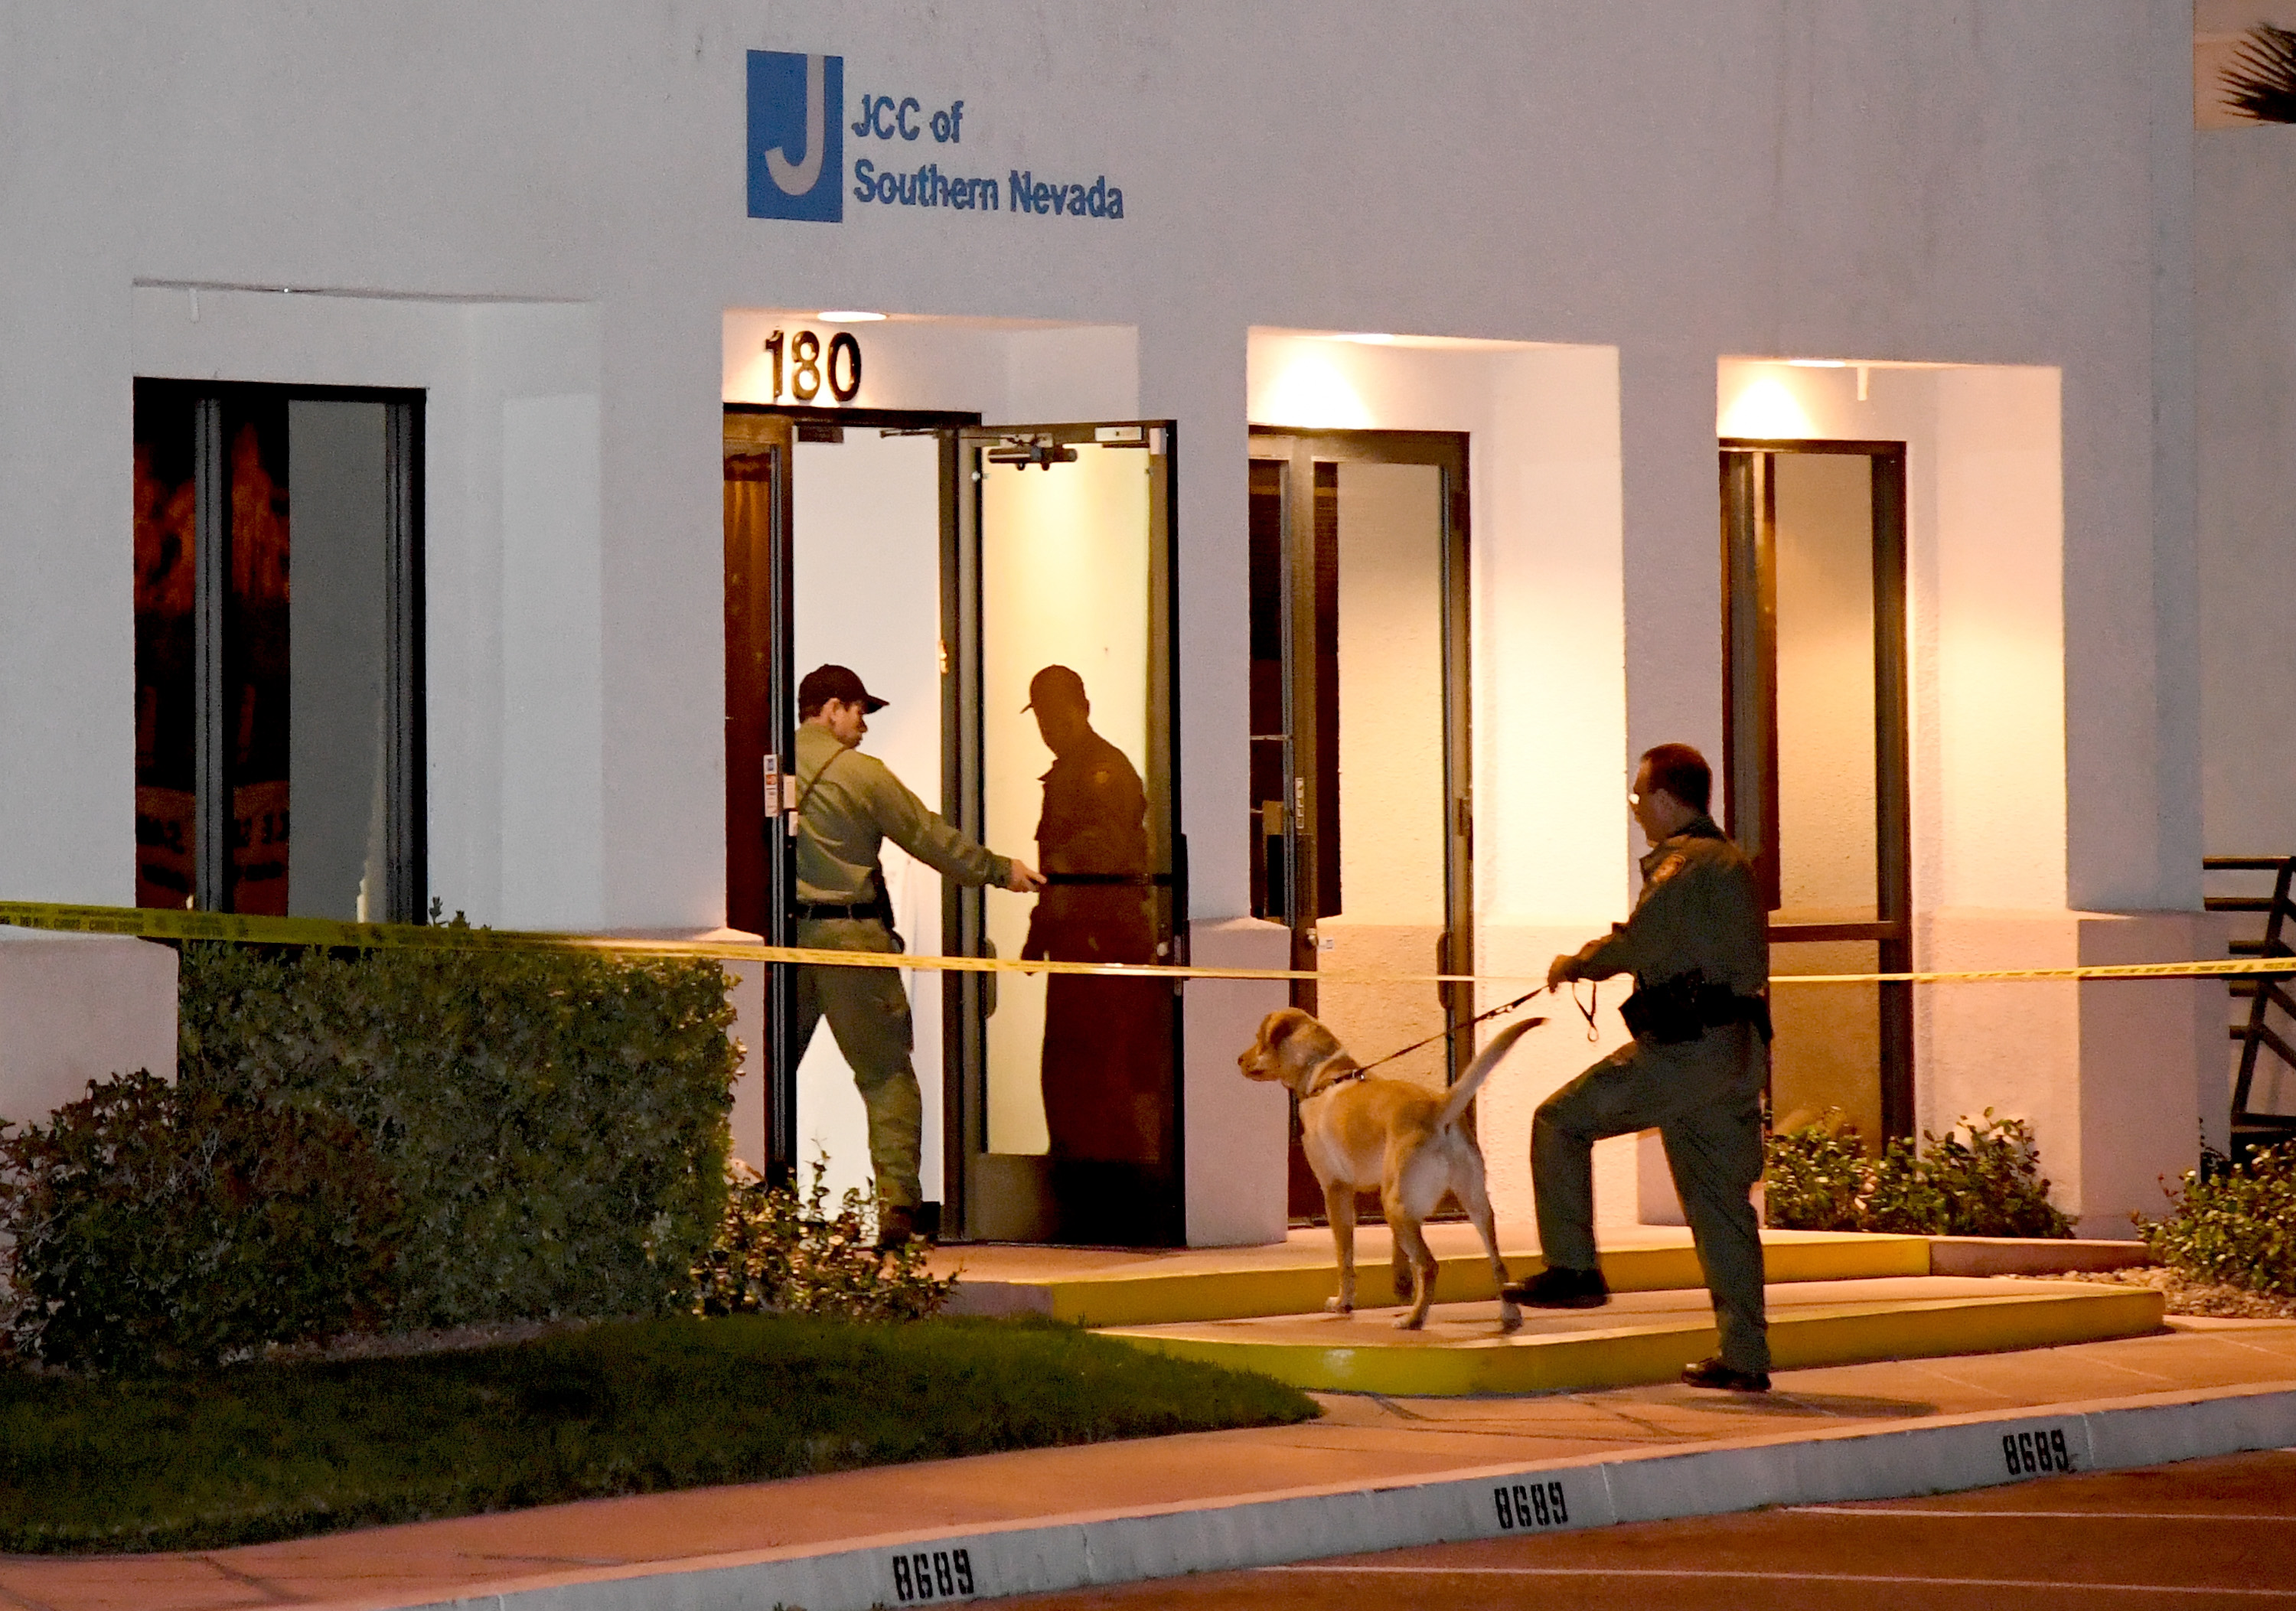 Police officers search the Jewish Community Center of Southern Nevada after an employee received a suspicious phone call that prompted an evacuation on February 26, 2017 in Las Vegas, Nevada. (Ethan Miller&mdash;Getty Images)